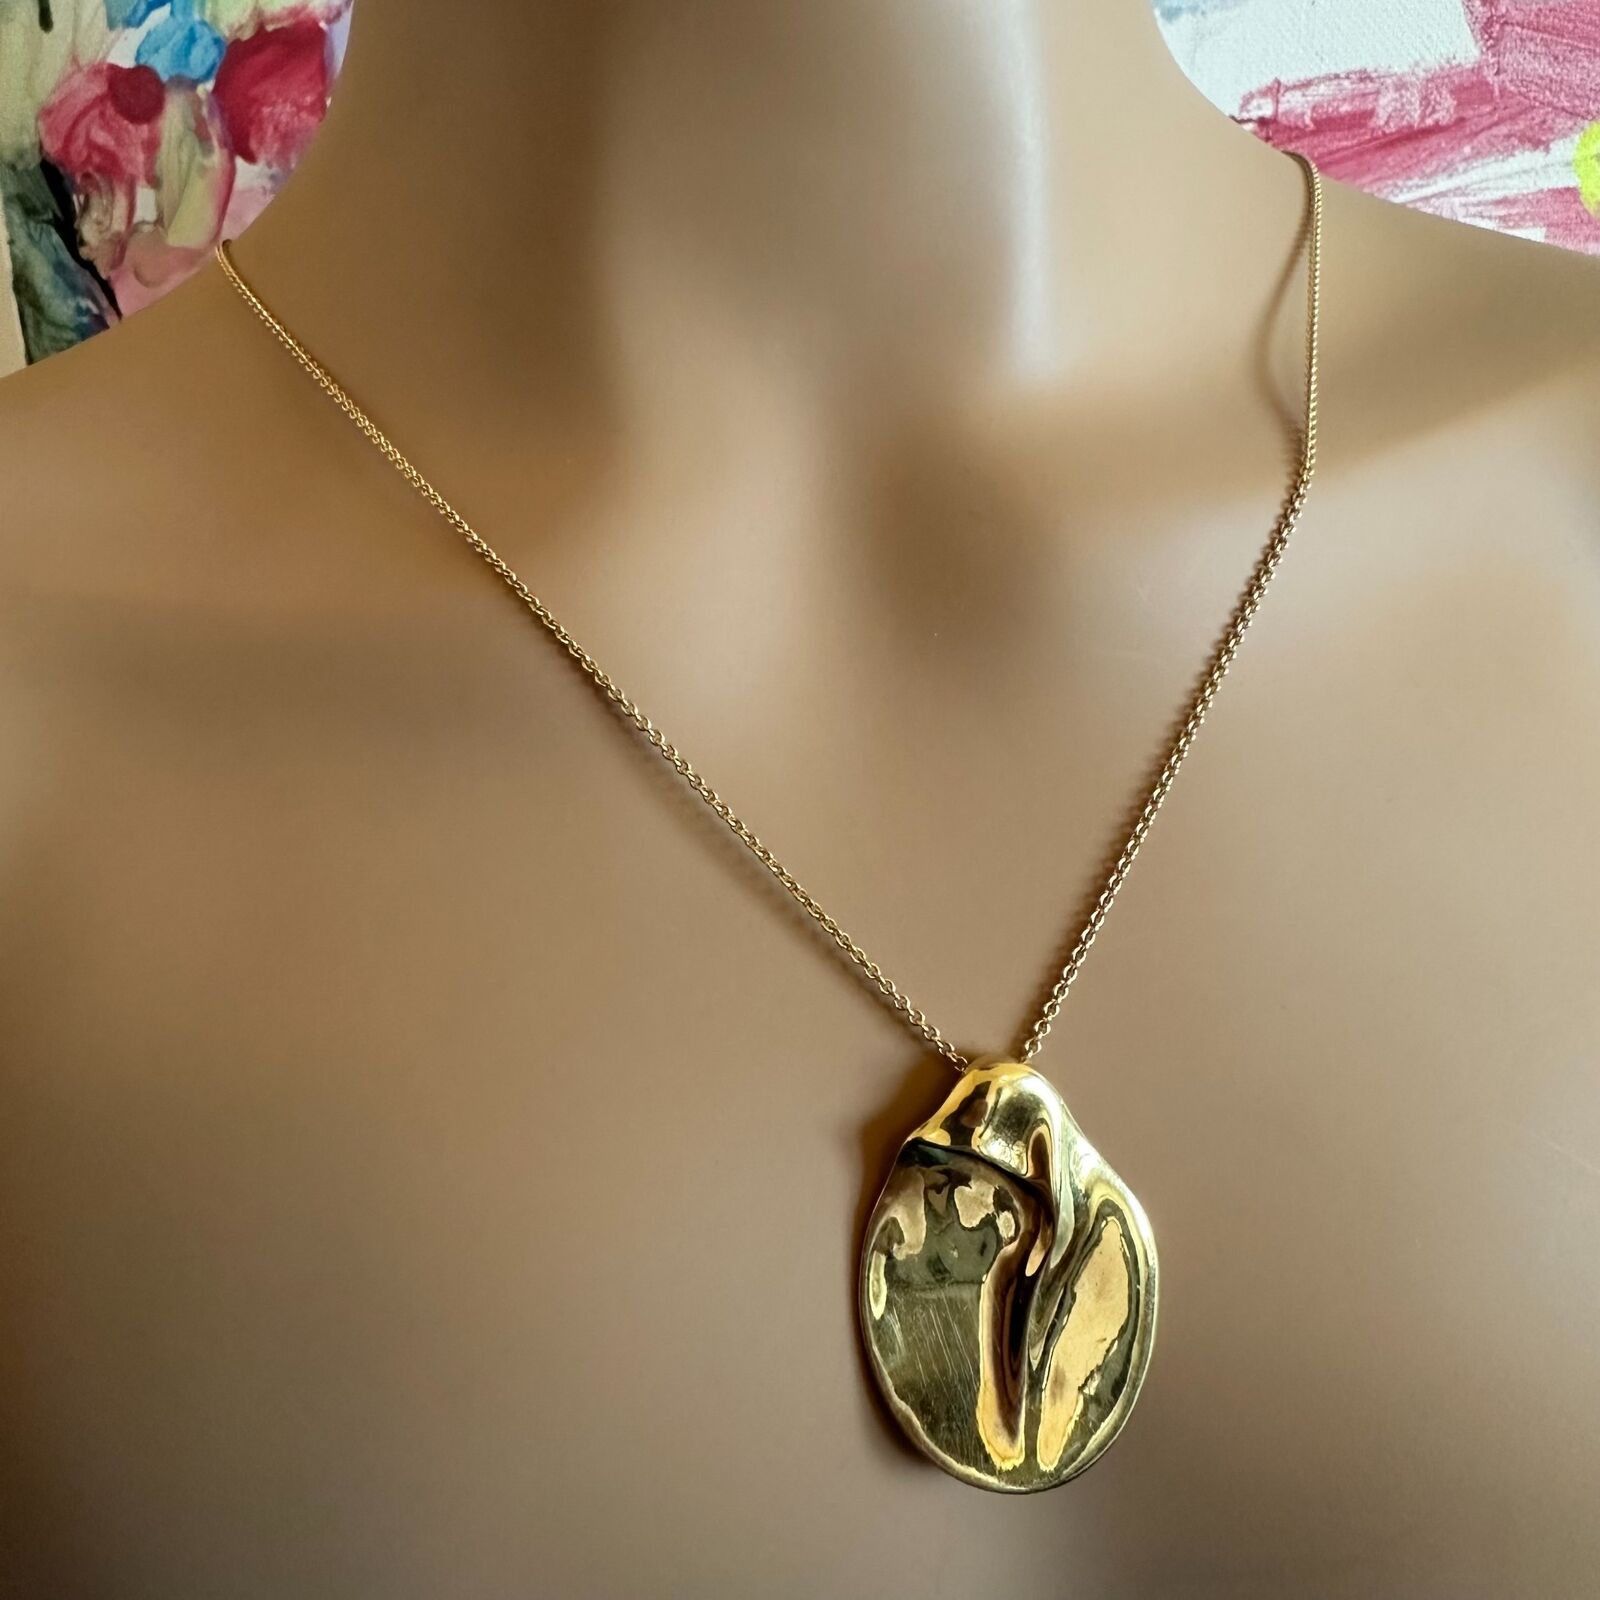 Tiffany & Co. Jewelry & Watches:Fine Jewelry:Necklaces & Pendants Tiffany & Co Peretti 18k Yellow Gold Madonna Pendant Extra Large Necklace 30"